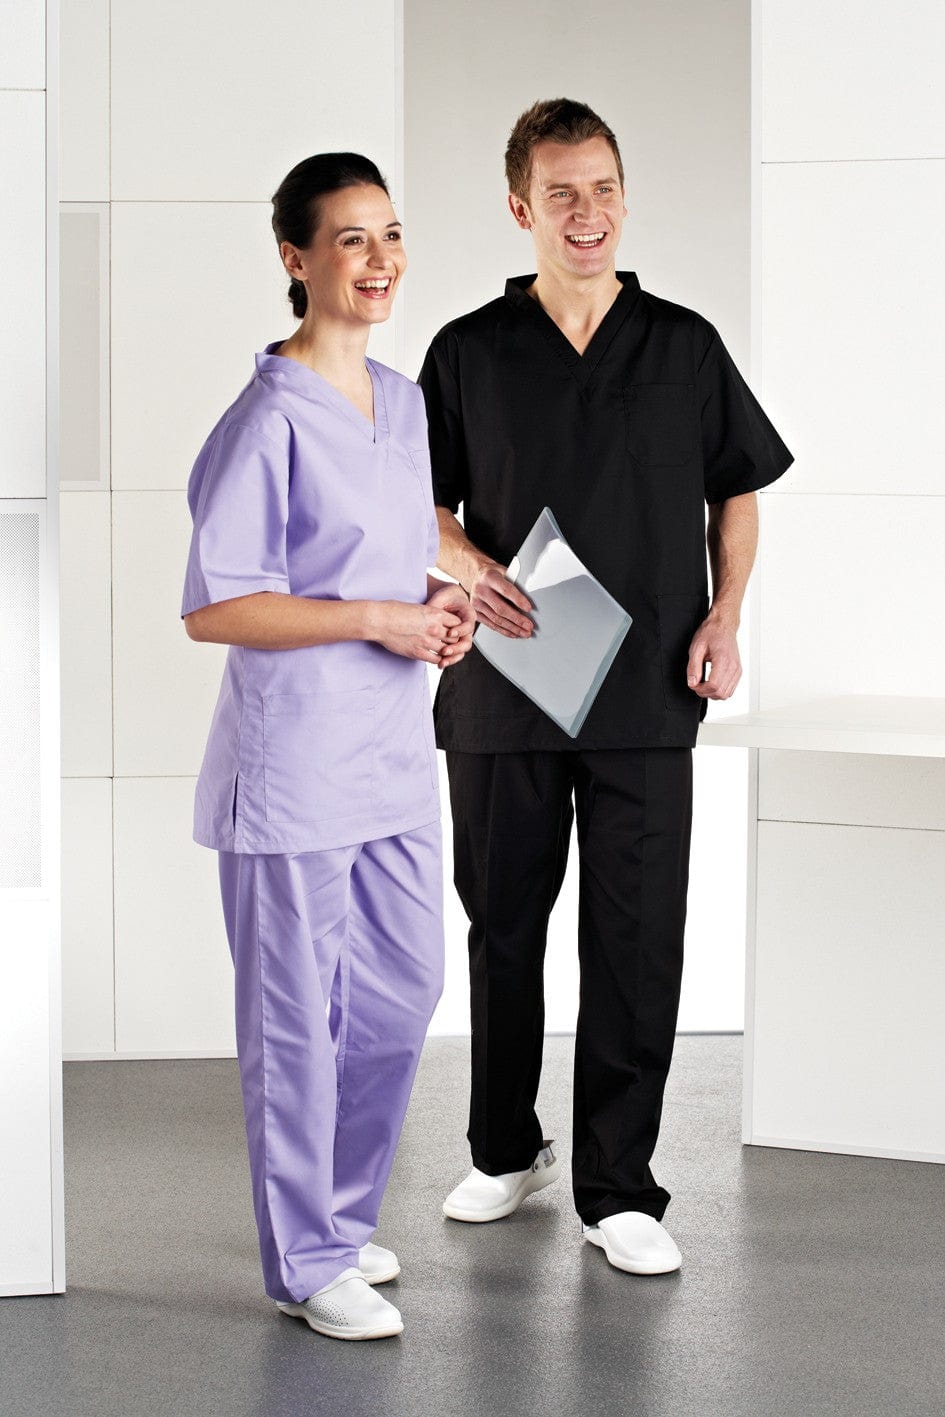 Two Models wearing Rizues Scrubs Suit Lilac and Black